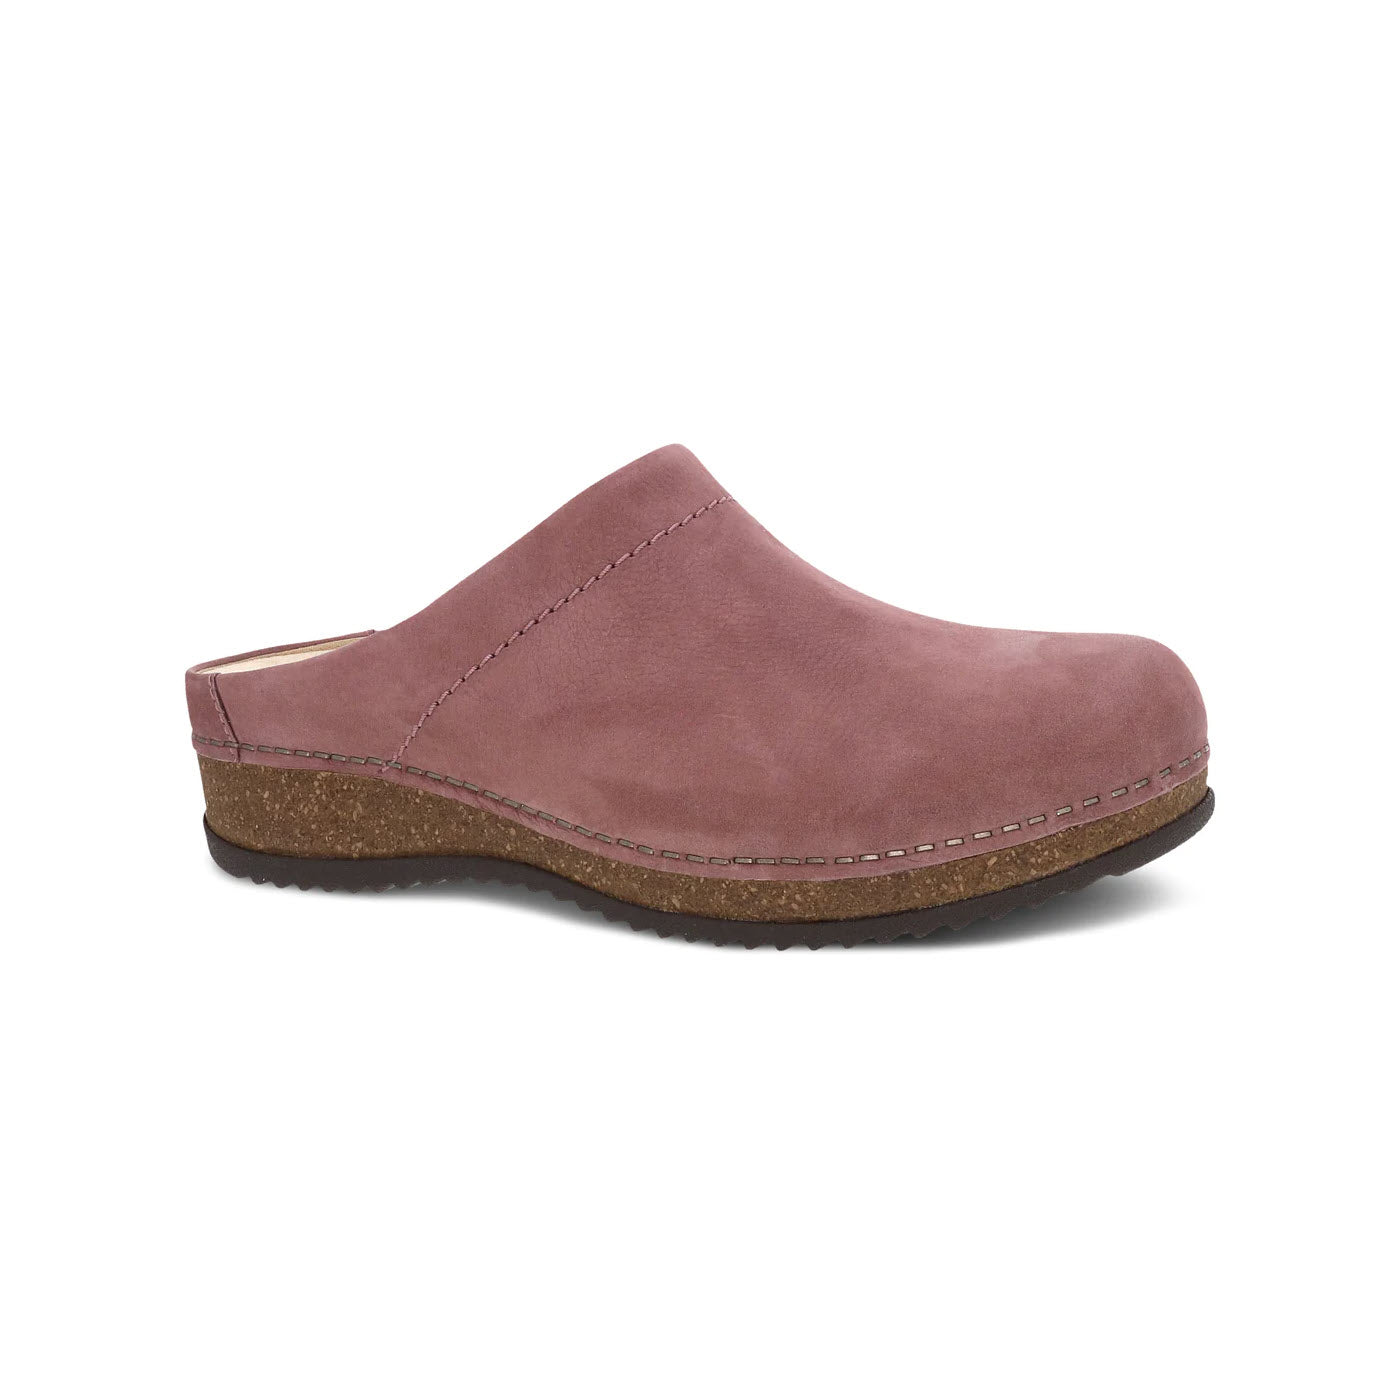 A single, pinkish-tan Dansko Mariella Rose clog with a cork sole and simple support slides against a white background.